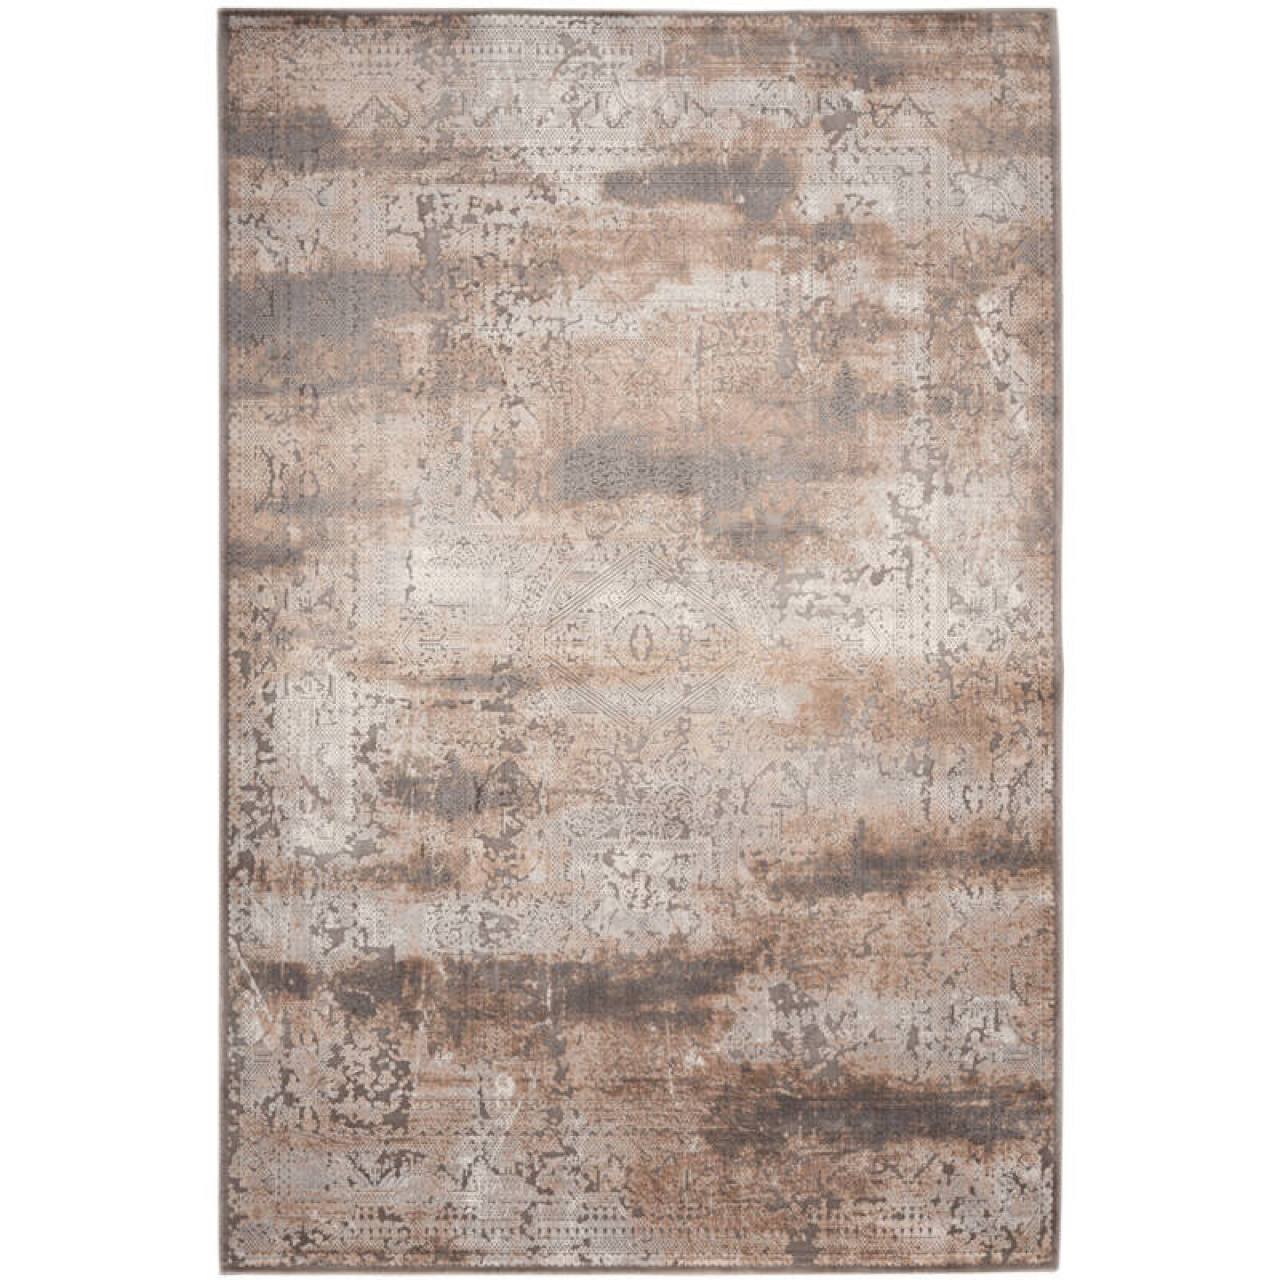 Obsession Haute Couture Jewel 950 Taupe szőnyeg-160x230